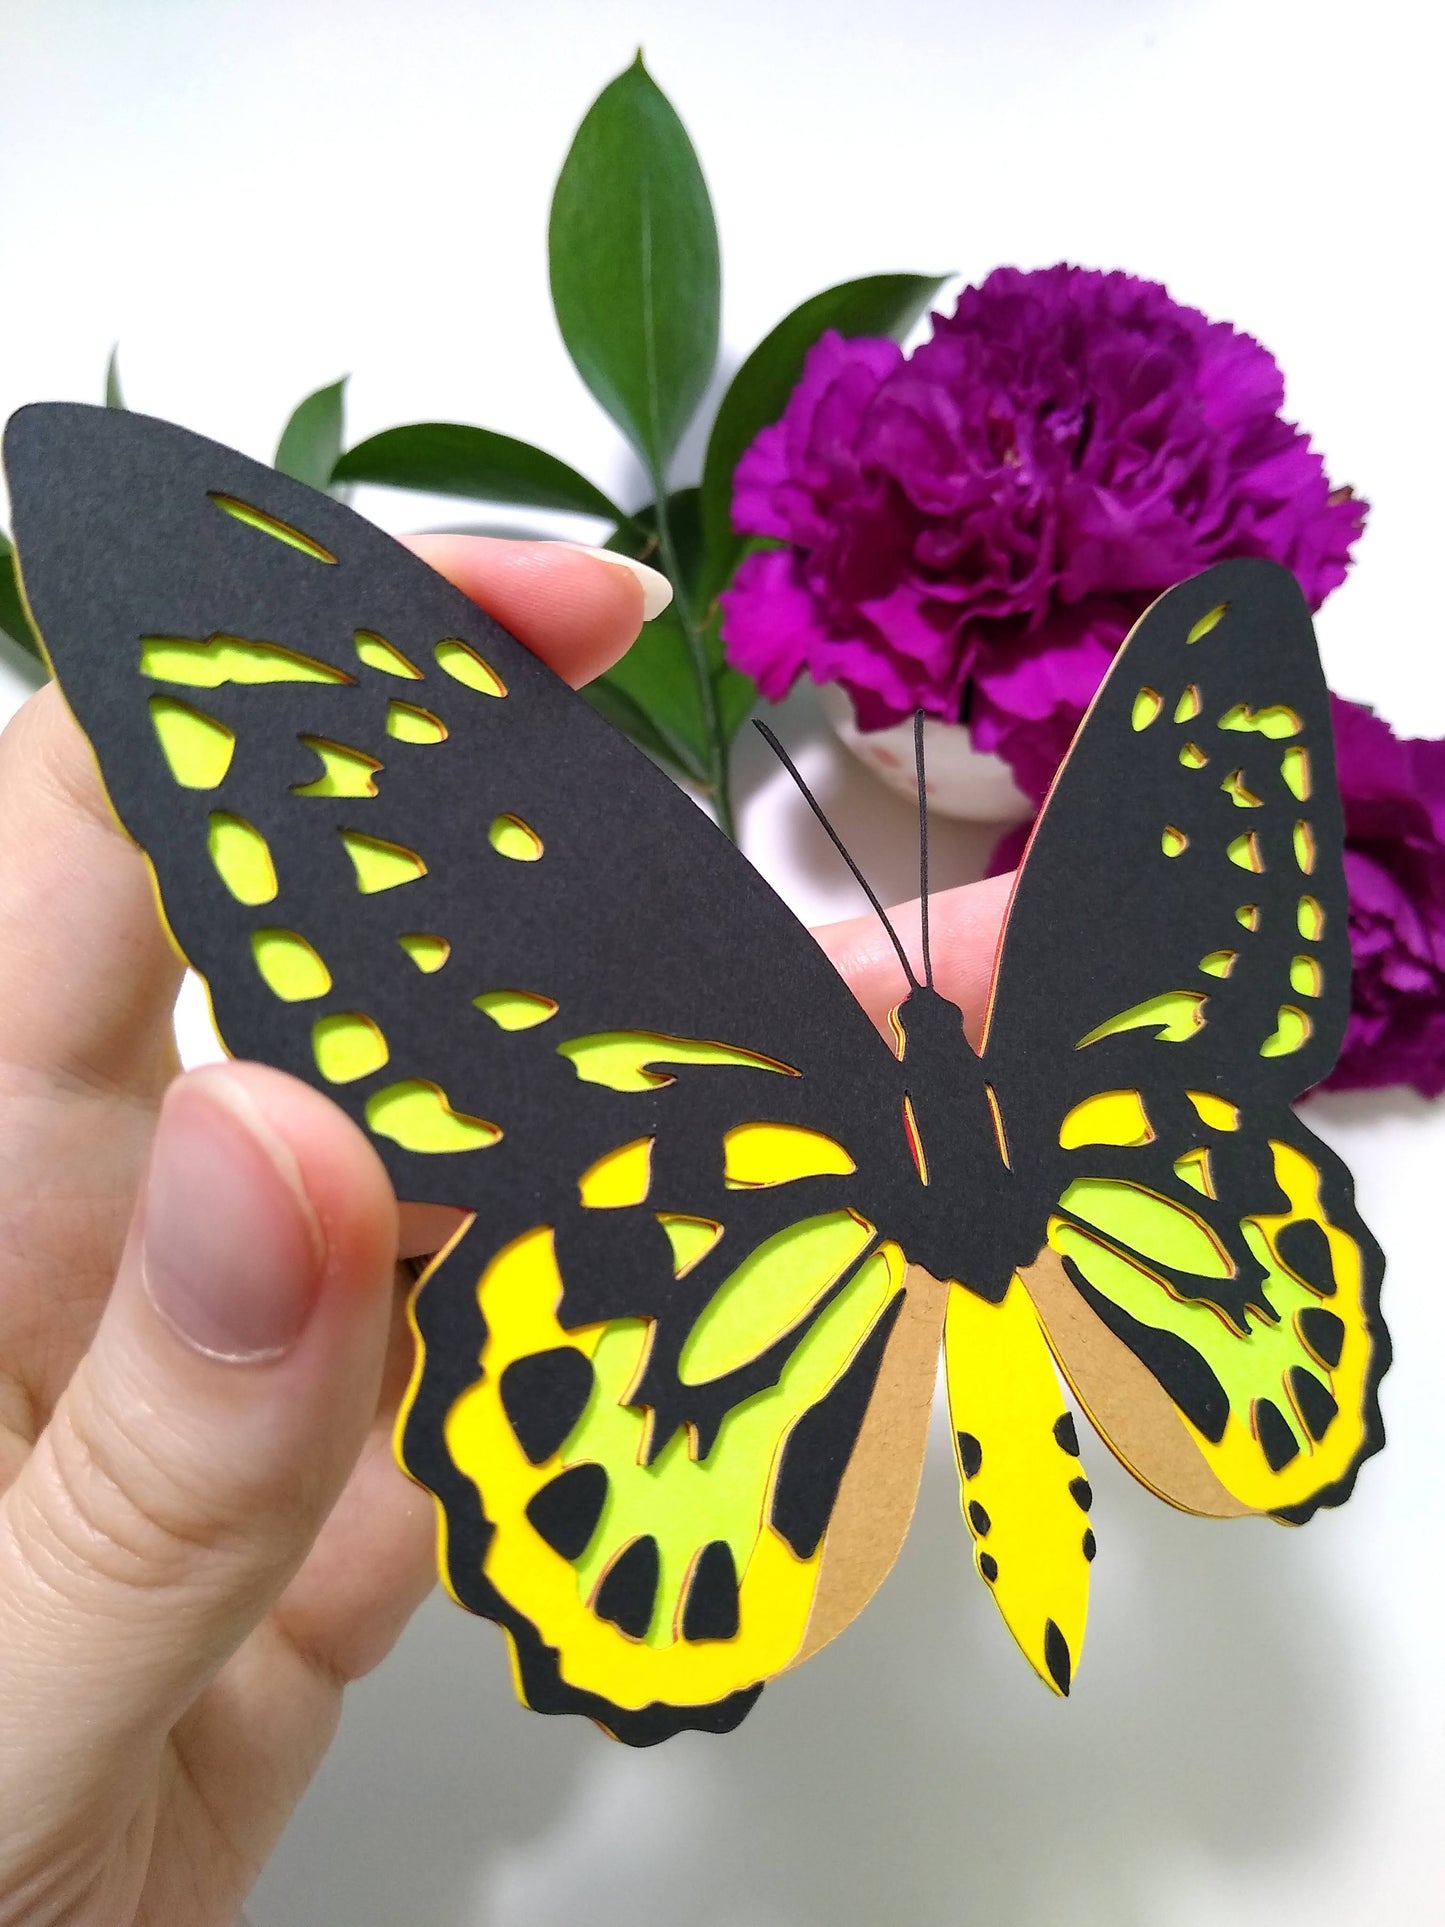 A hand holds a multi-layered paper butterfly to the camera, in the design of the back of a Cairns Birdwing butterfly. In the background are leaves and two purple flower.